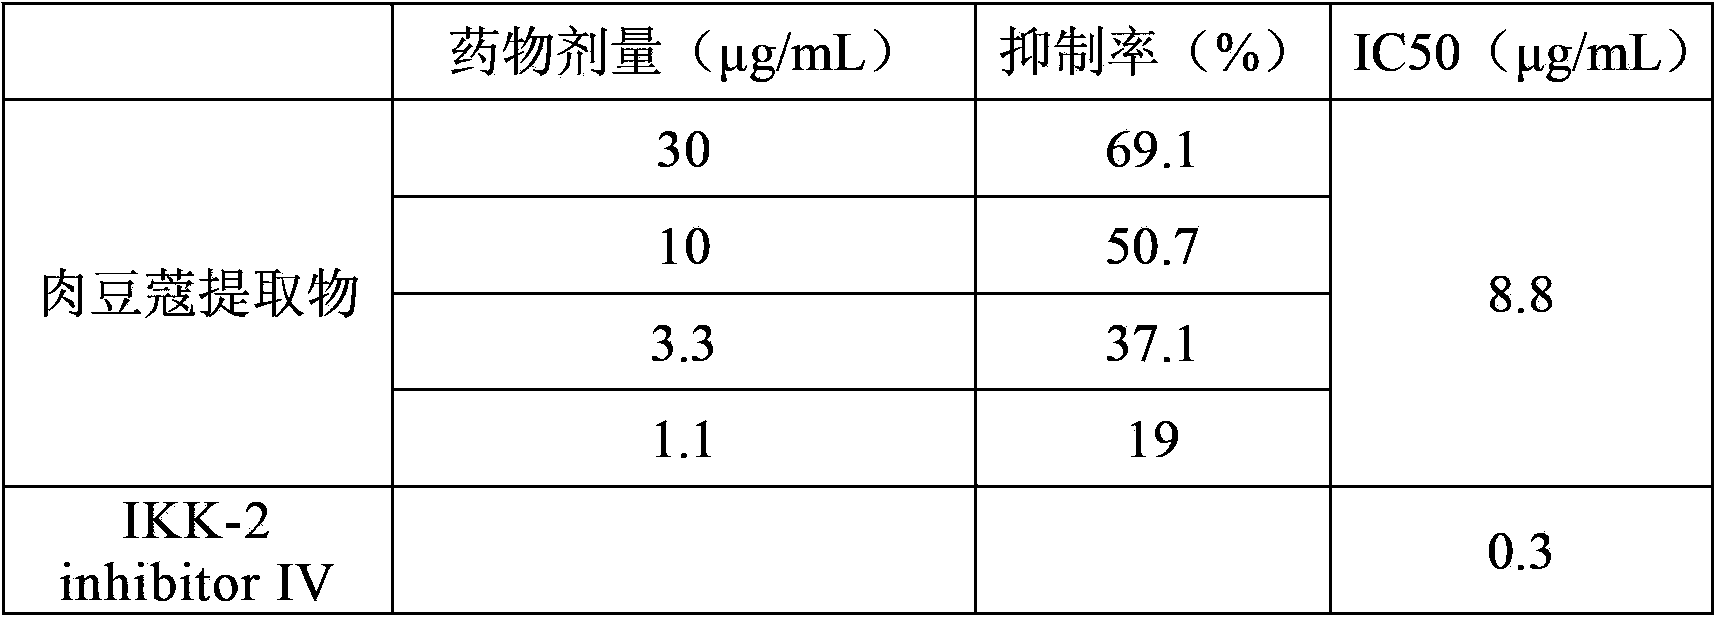 Application of nutmeg extract